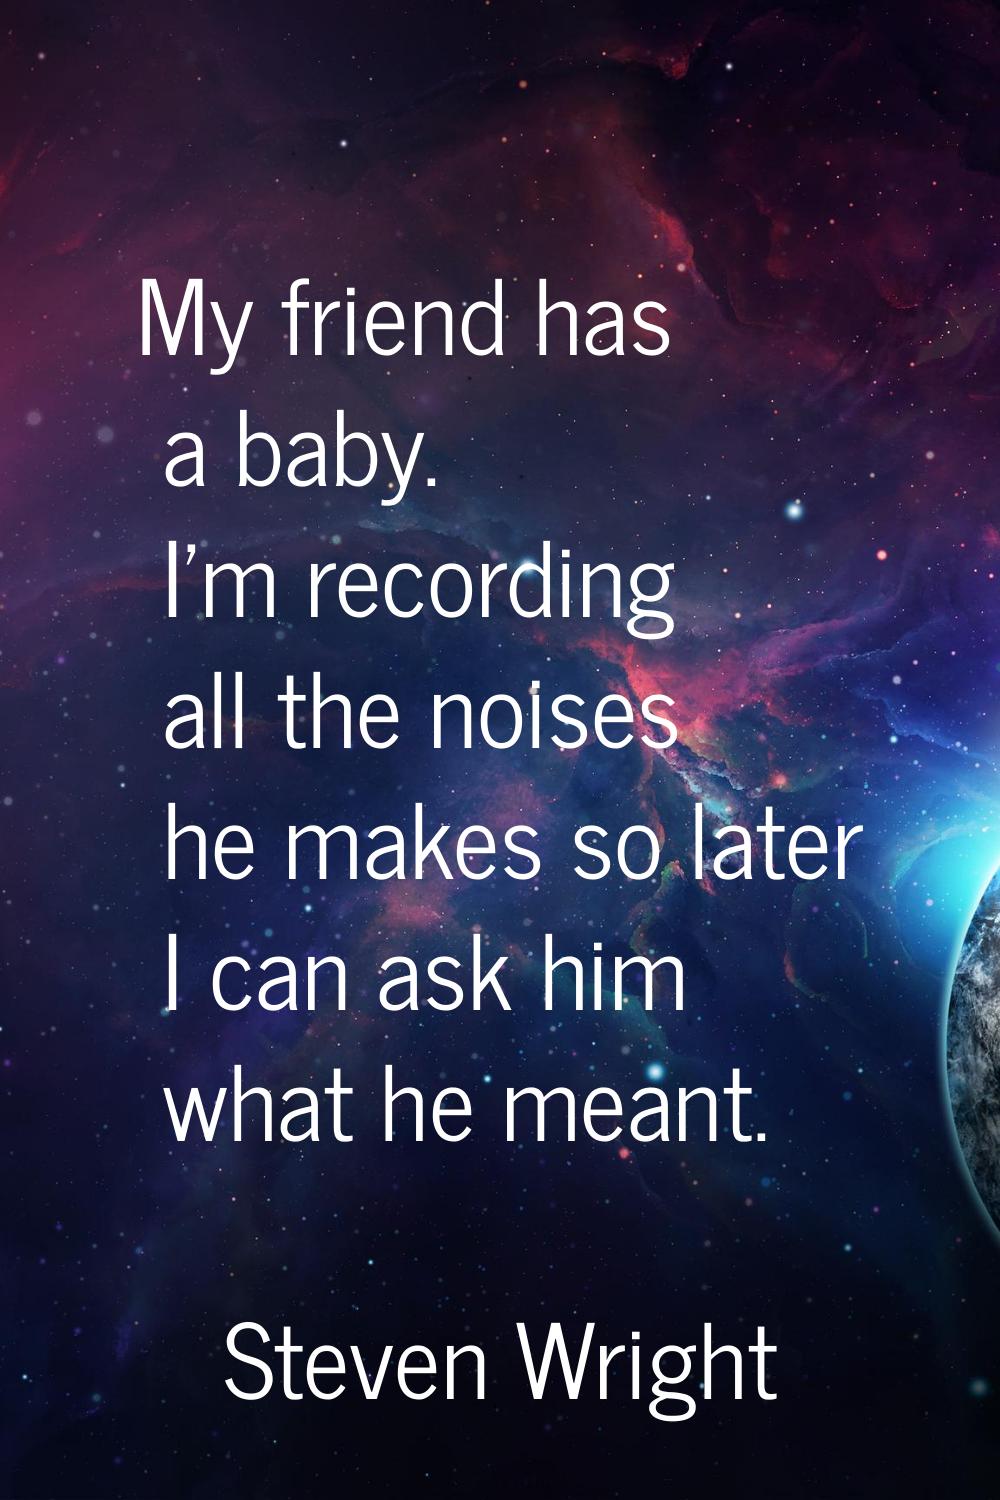 My friend has a baby. I'm recording all the noises he makes so later I can ask him what he meant.